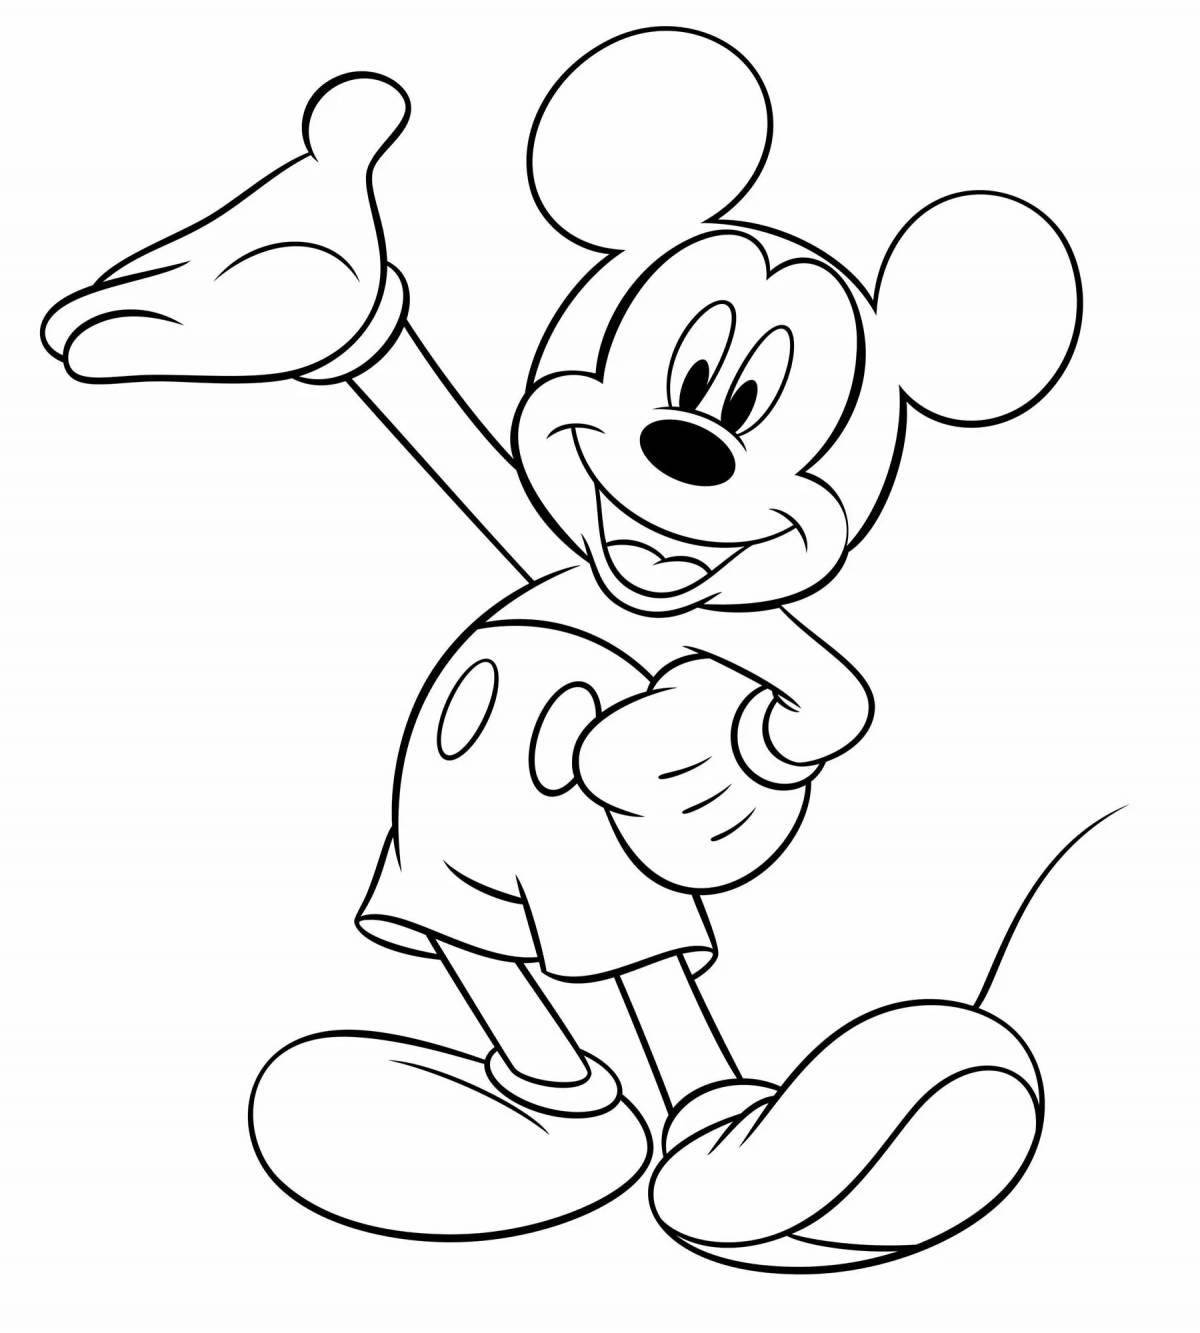 Coloring book with cute cartoon characters for children 5-6 years old